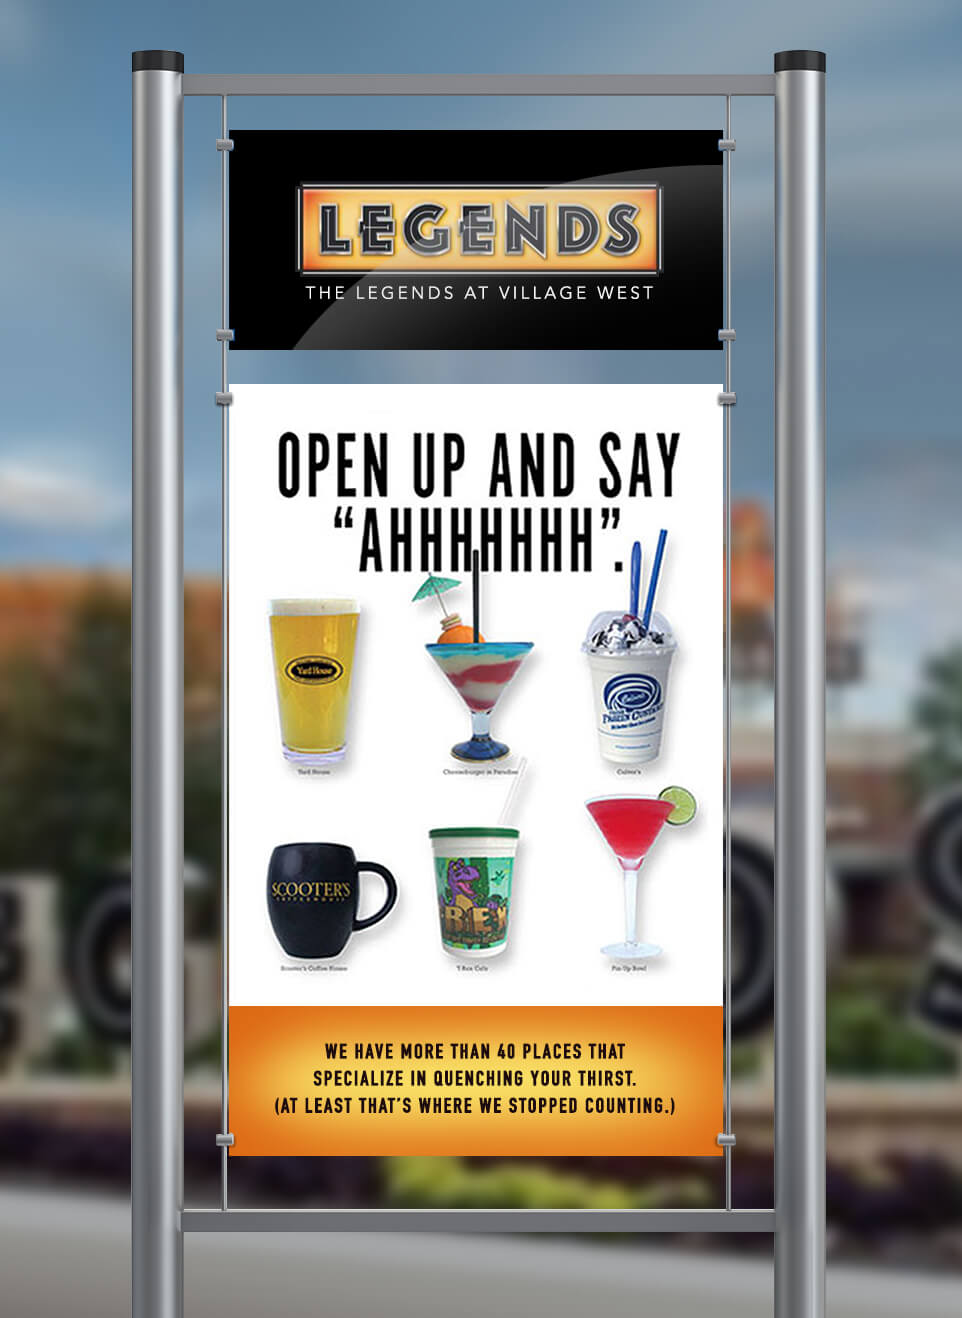 On-site poster #2 series created for The Legends at Village West.